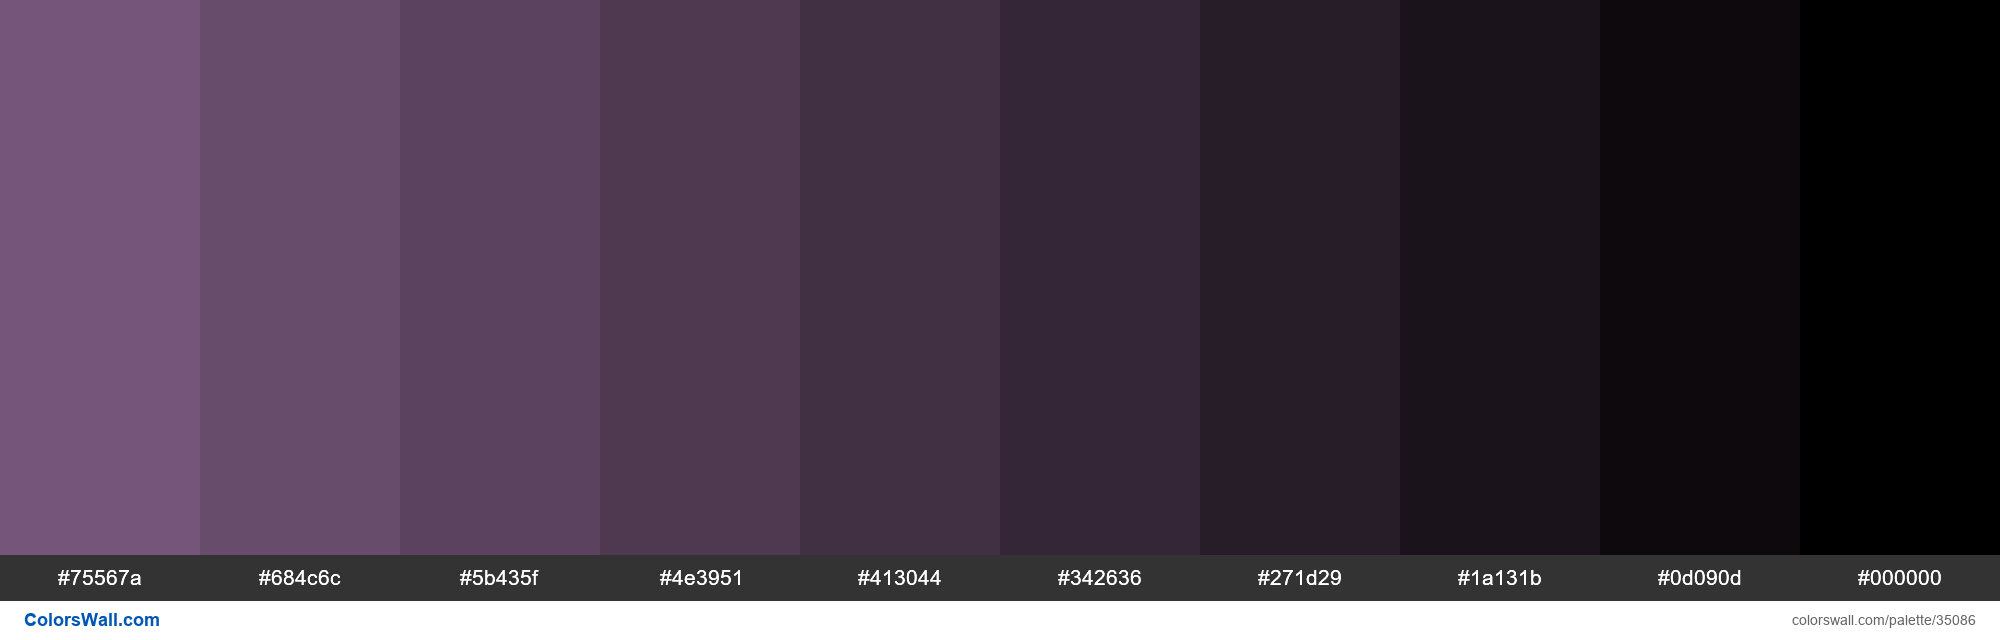 https://colorswall.com/images/palettes/shades-xkcd-color-dusty-purple-825f87-hex-35086-colorswall.png